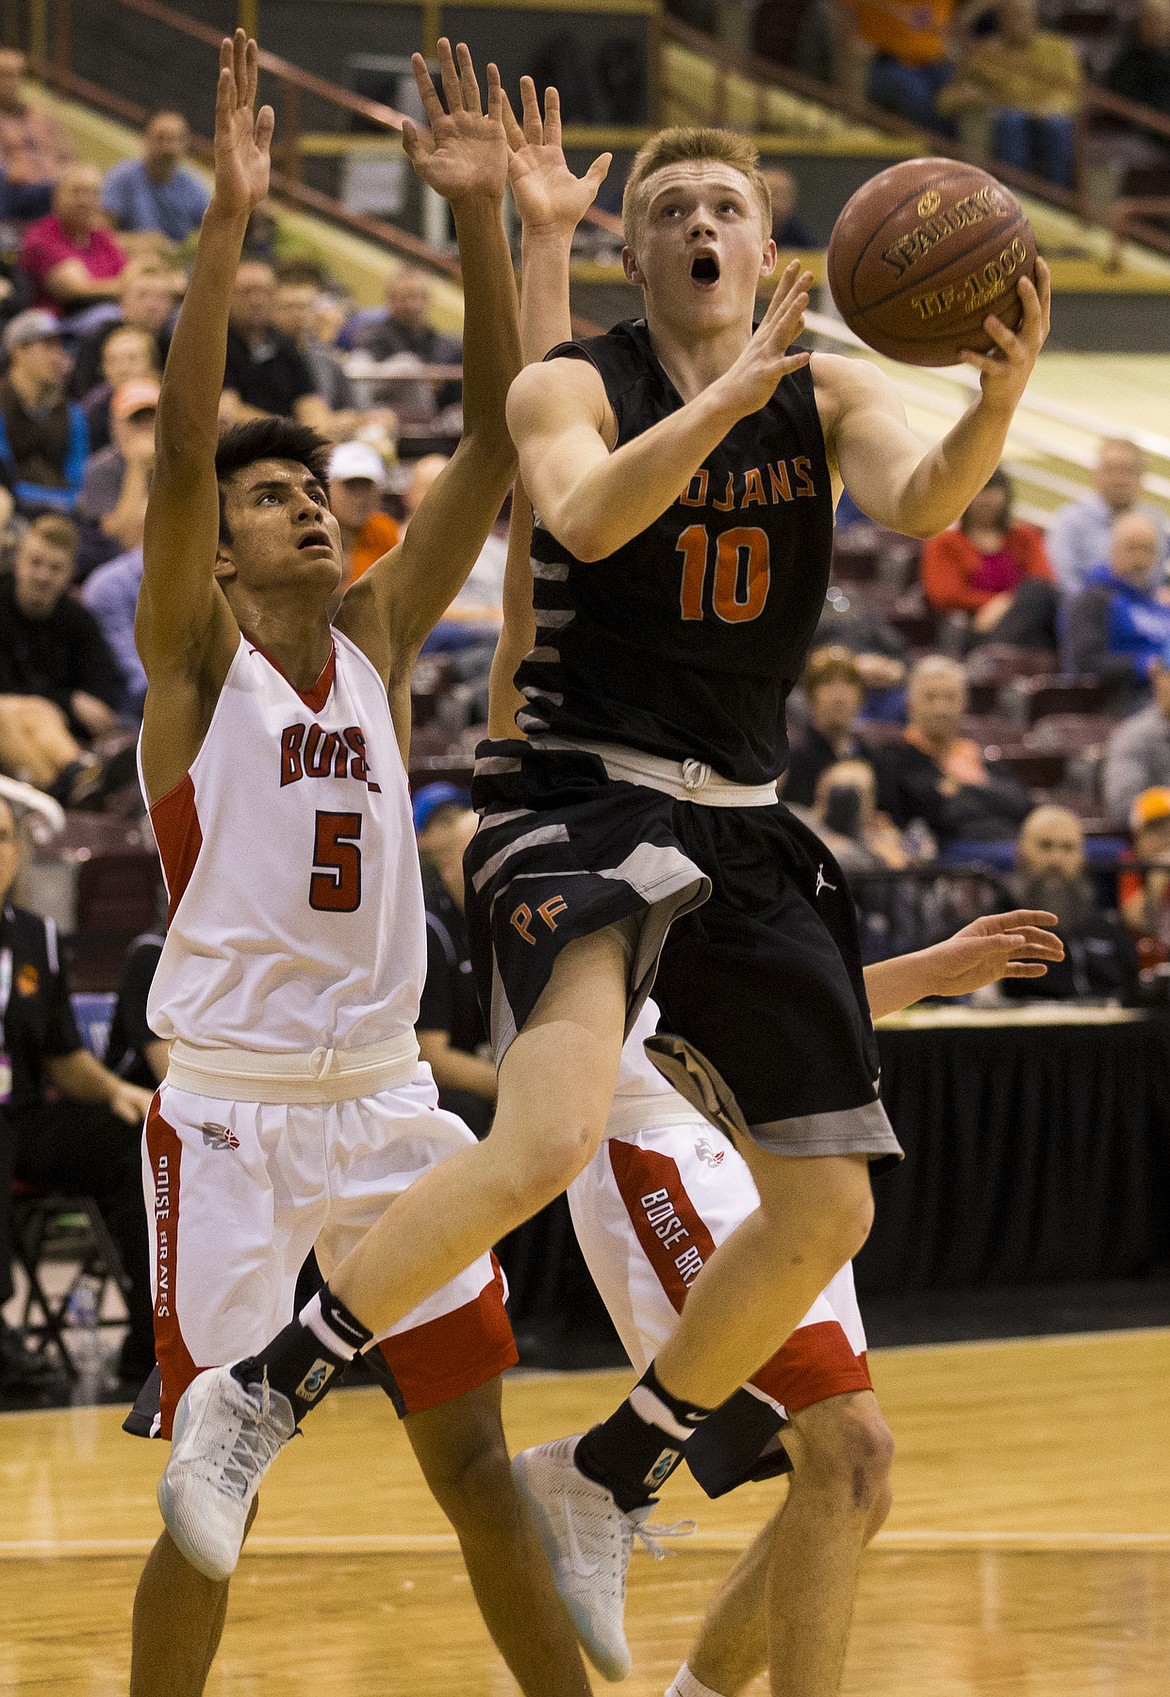 LOREN BENOIT/Press

Post Falls&#146; Tanner McCliment-Call goes for a layup against Boise&#146;s Lucas Centeno during the first half of Thursday night&#146;s semifinal game at the Ford Idaho Center in Nampa. McCliment-Call had 15 points in the Trojan&#146;s 54-52 win.